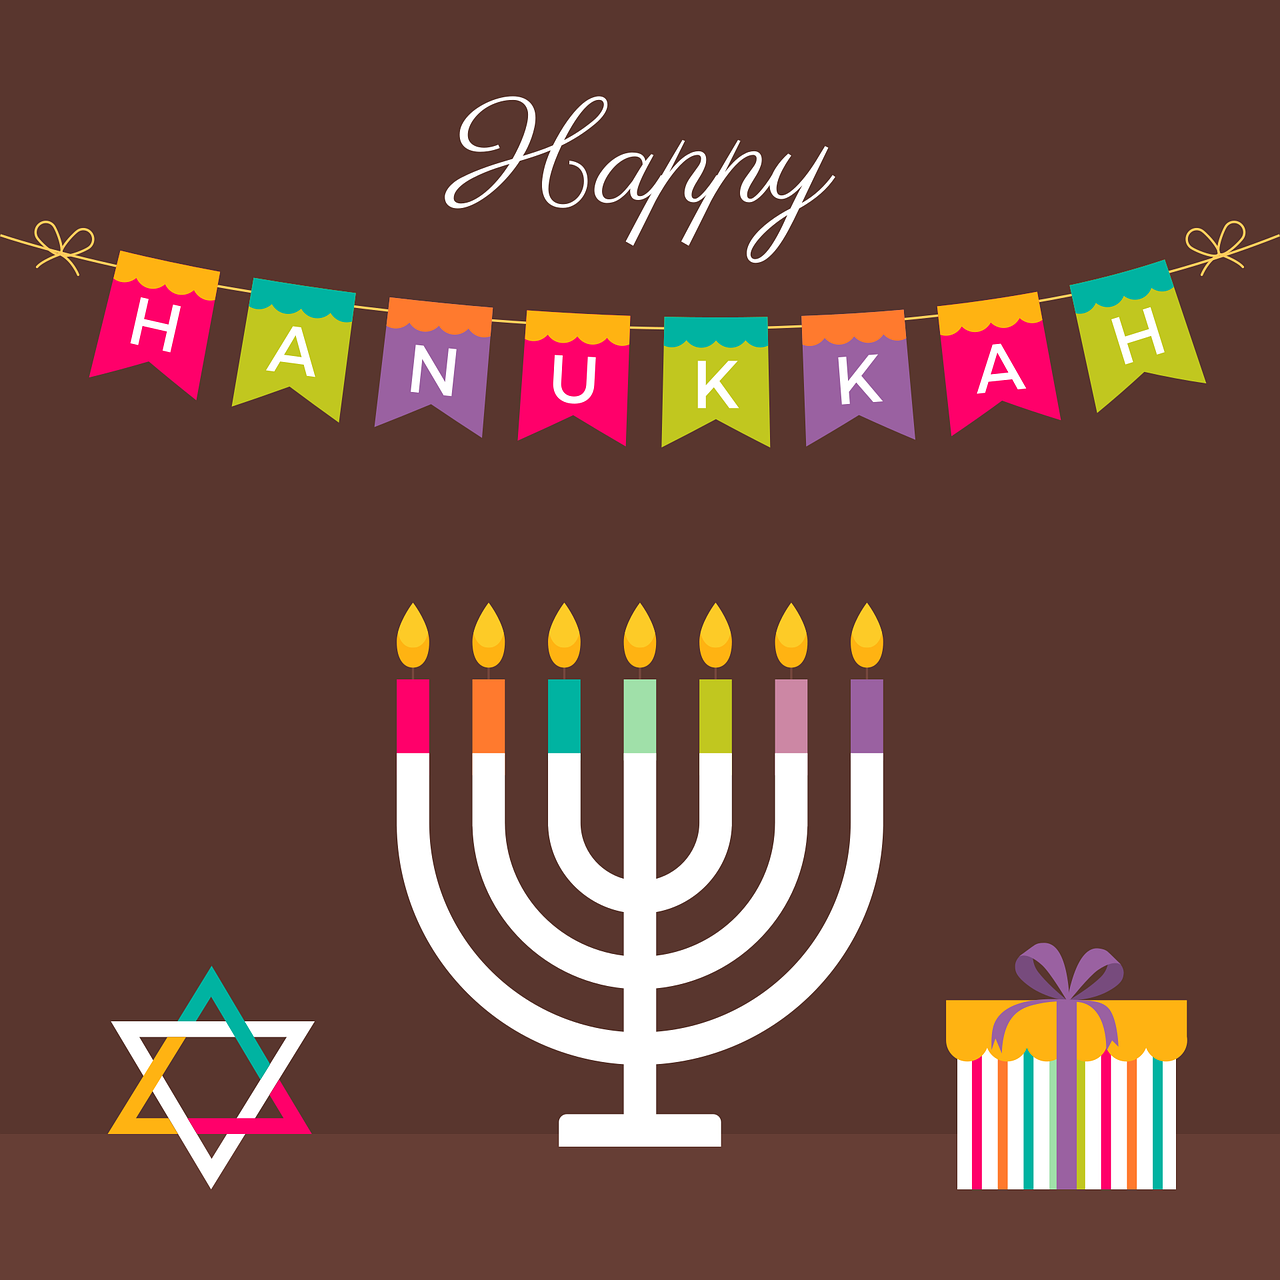 Send Hanukkah e-cards and support young people experiencing mental health difficulties eCards